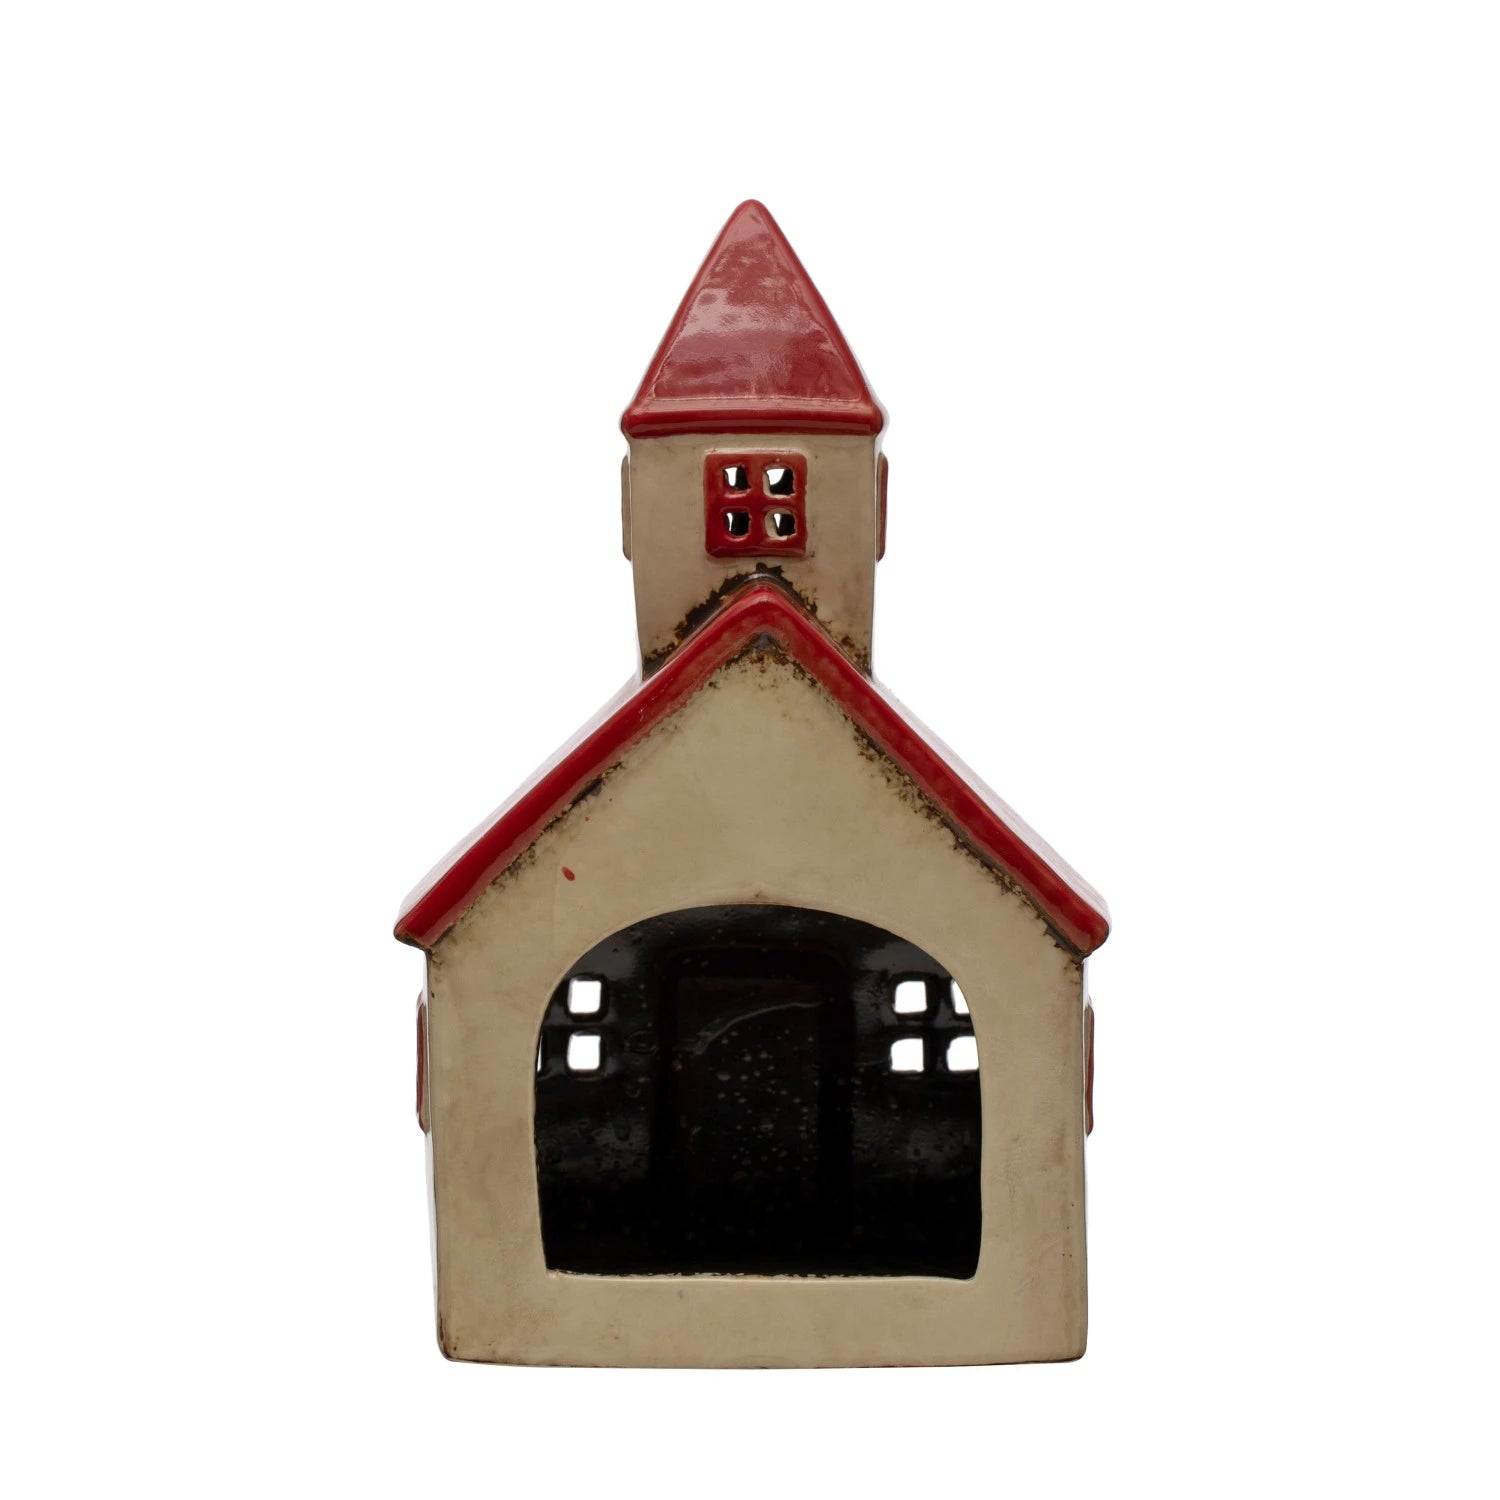 back view of the hand painted stoneware church revealing a opening for a votive candle and displayed against a white background